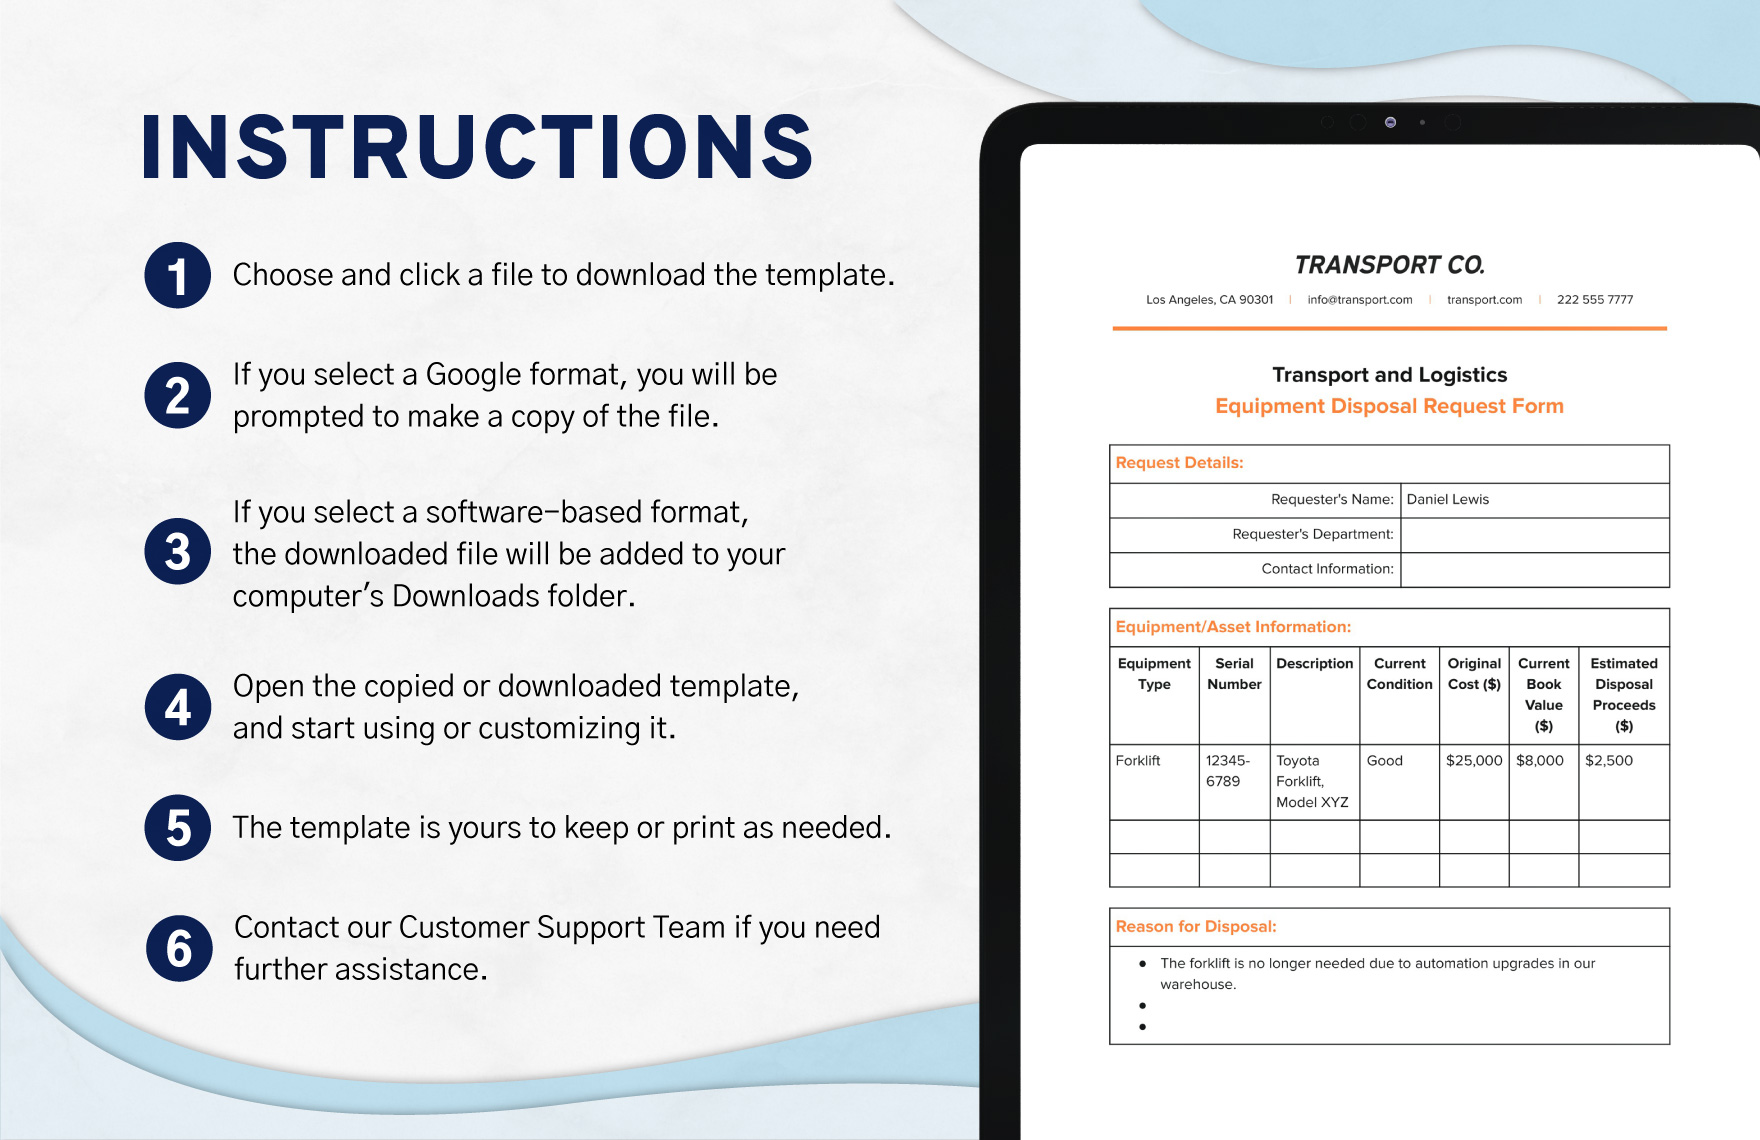 Transport and Logistics Equipment Disposal Request Form Template